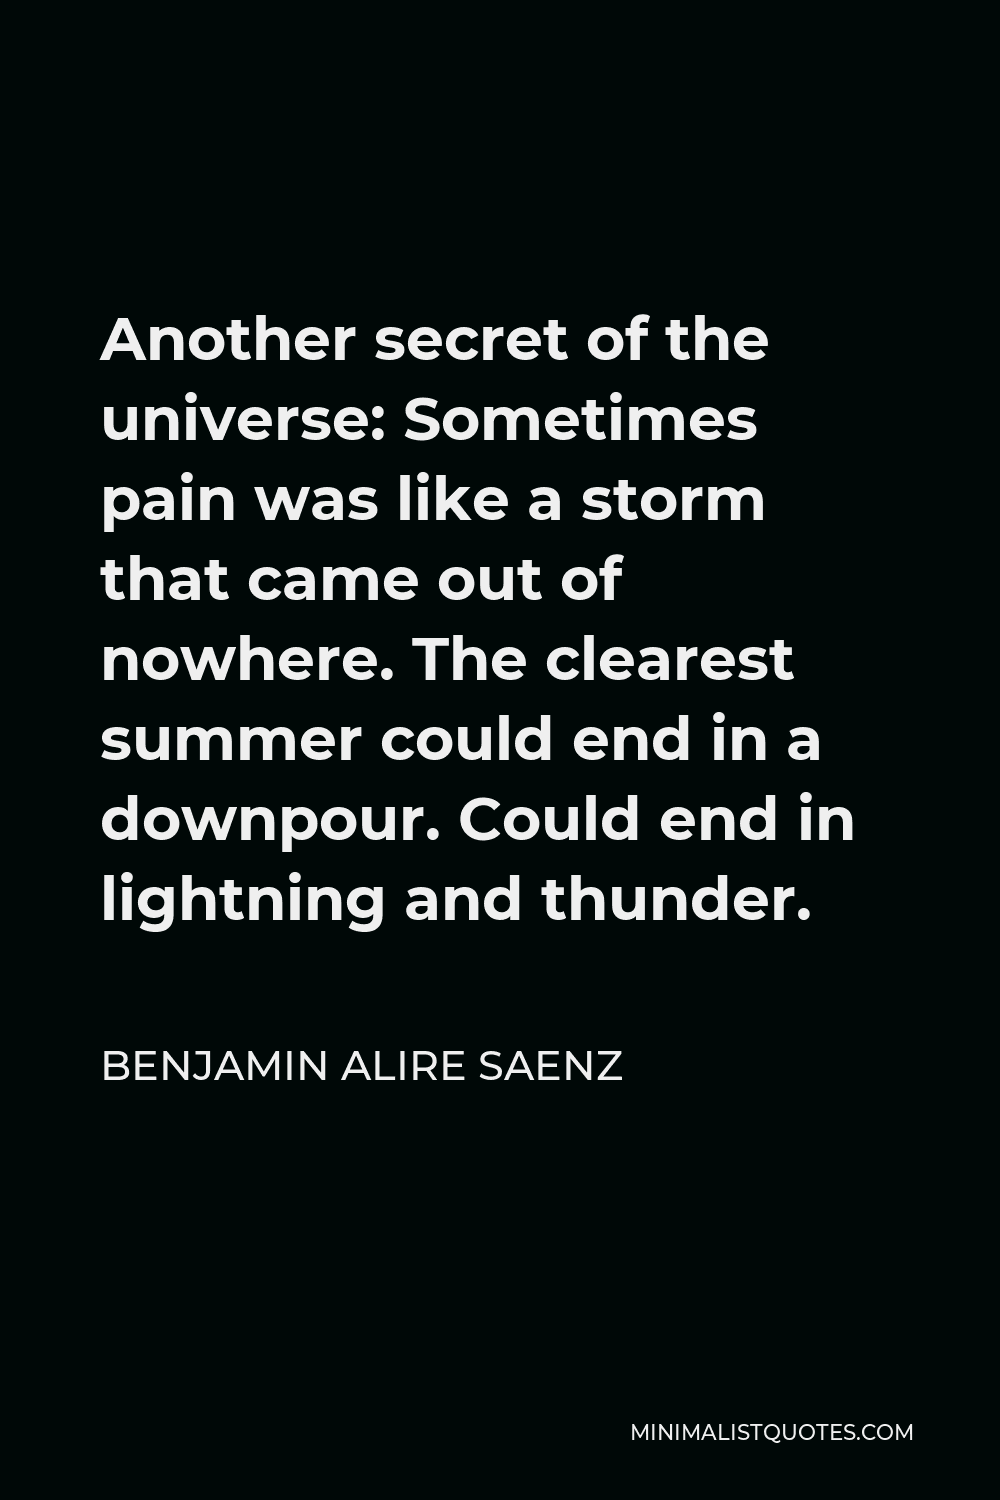 Benjamin Alire Saenz Quote - Another secret of the universe: Sometimes pain was like a storm that came out of nowhere. The clearest summer could end in a downpour. Could end in lightning and thunder.